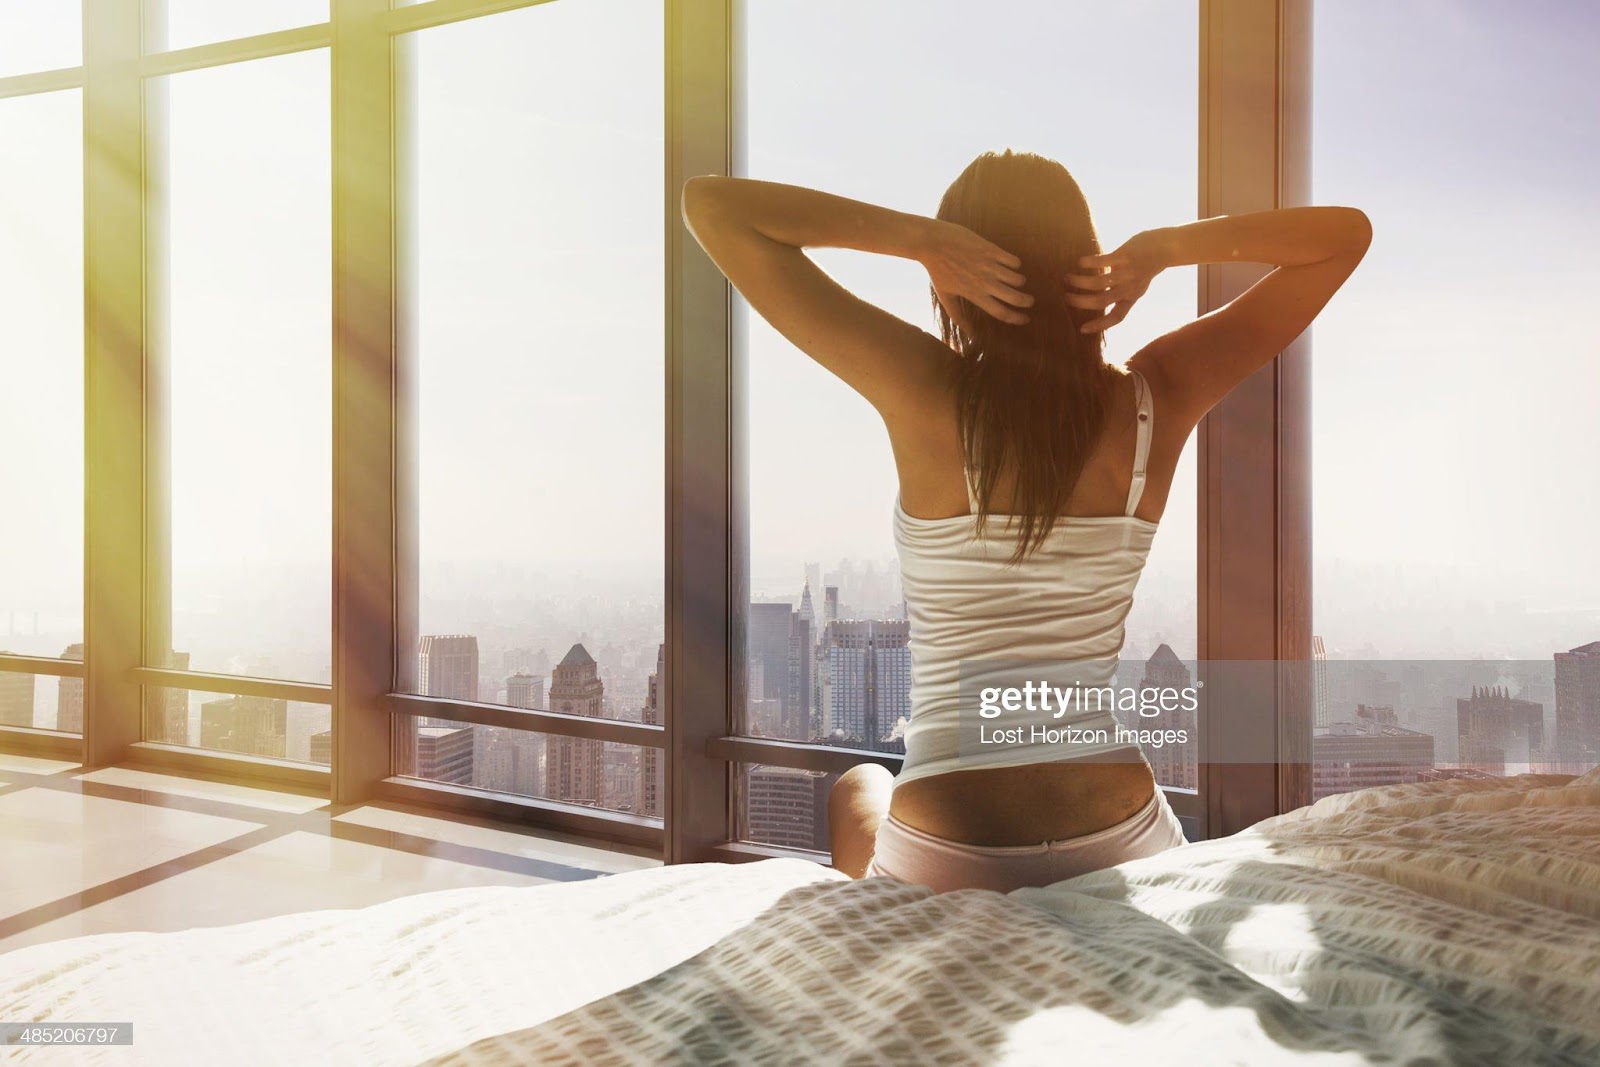 D:\Documenti\posts\posts\Miami\foto\donne normali\young-woman-sitting-on-bed-stretching-overlooking-city-picture-id485206797.jpg